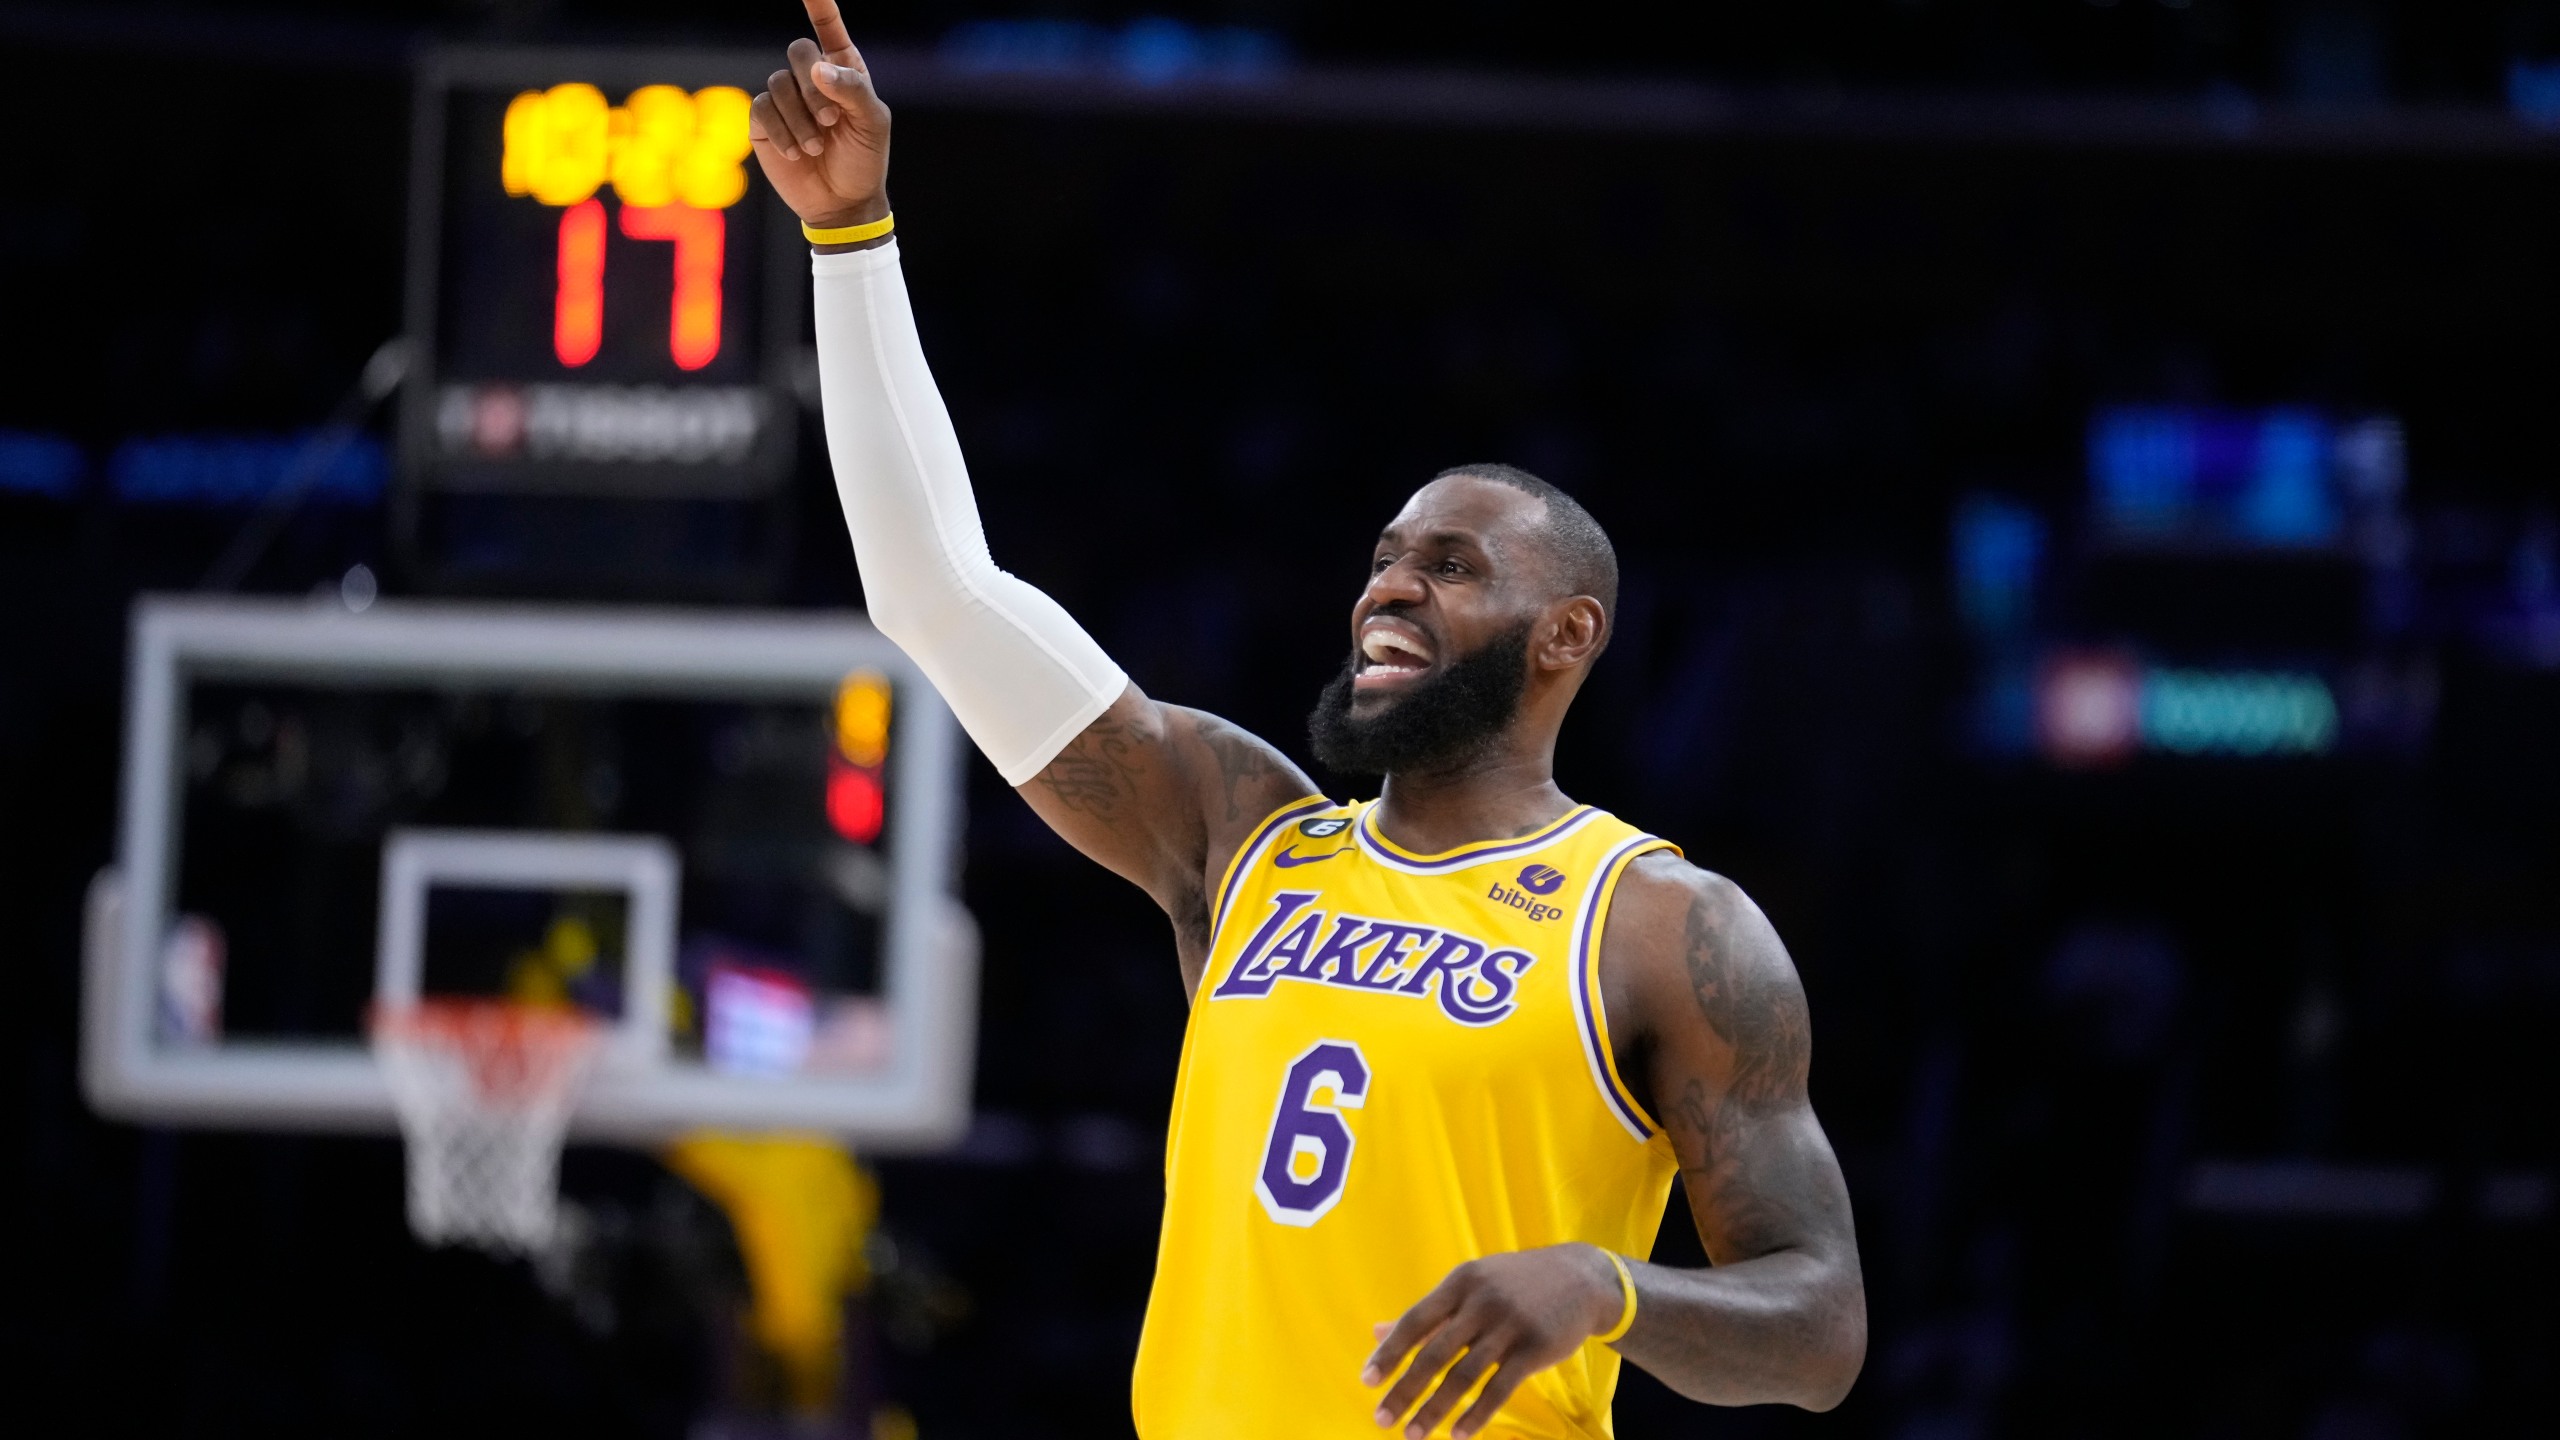 LeBron James, Los Angeles Lakers now NBA Playoffs bound after OT win over Minnesota Timberwolves